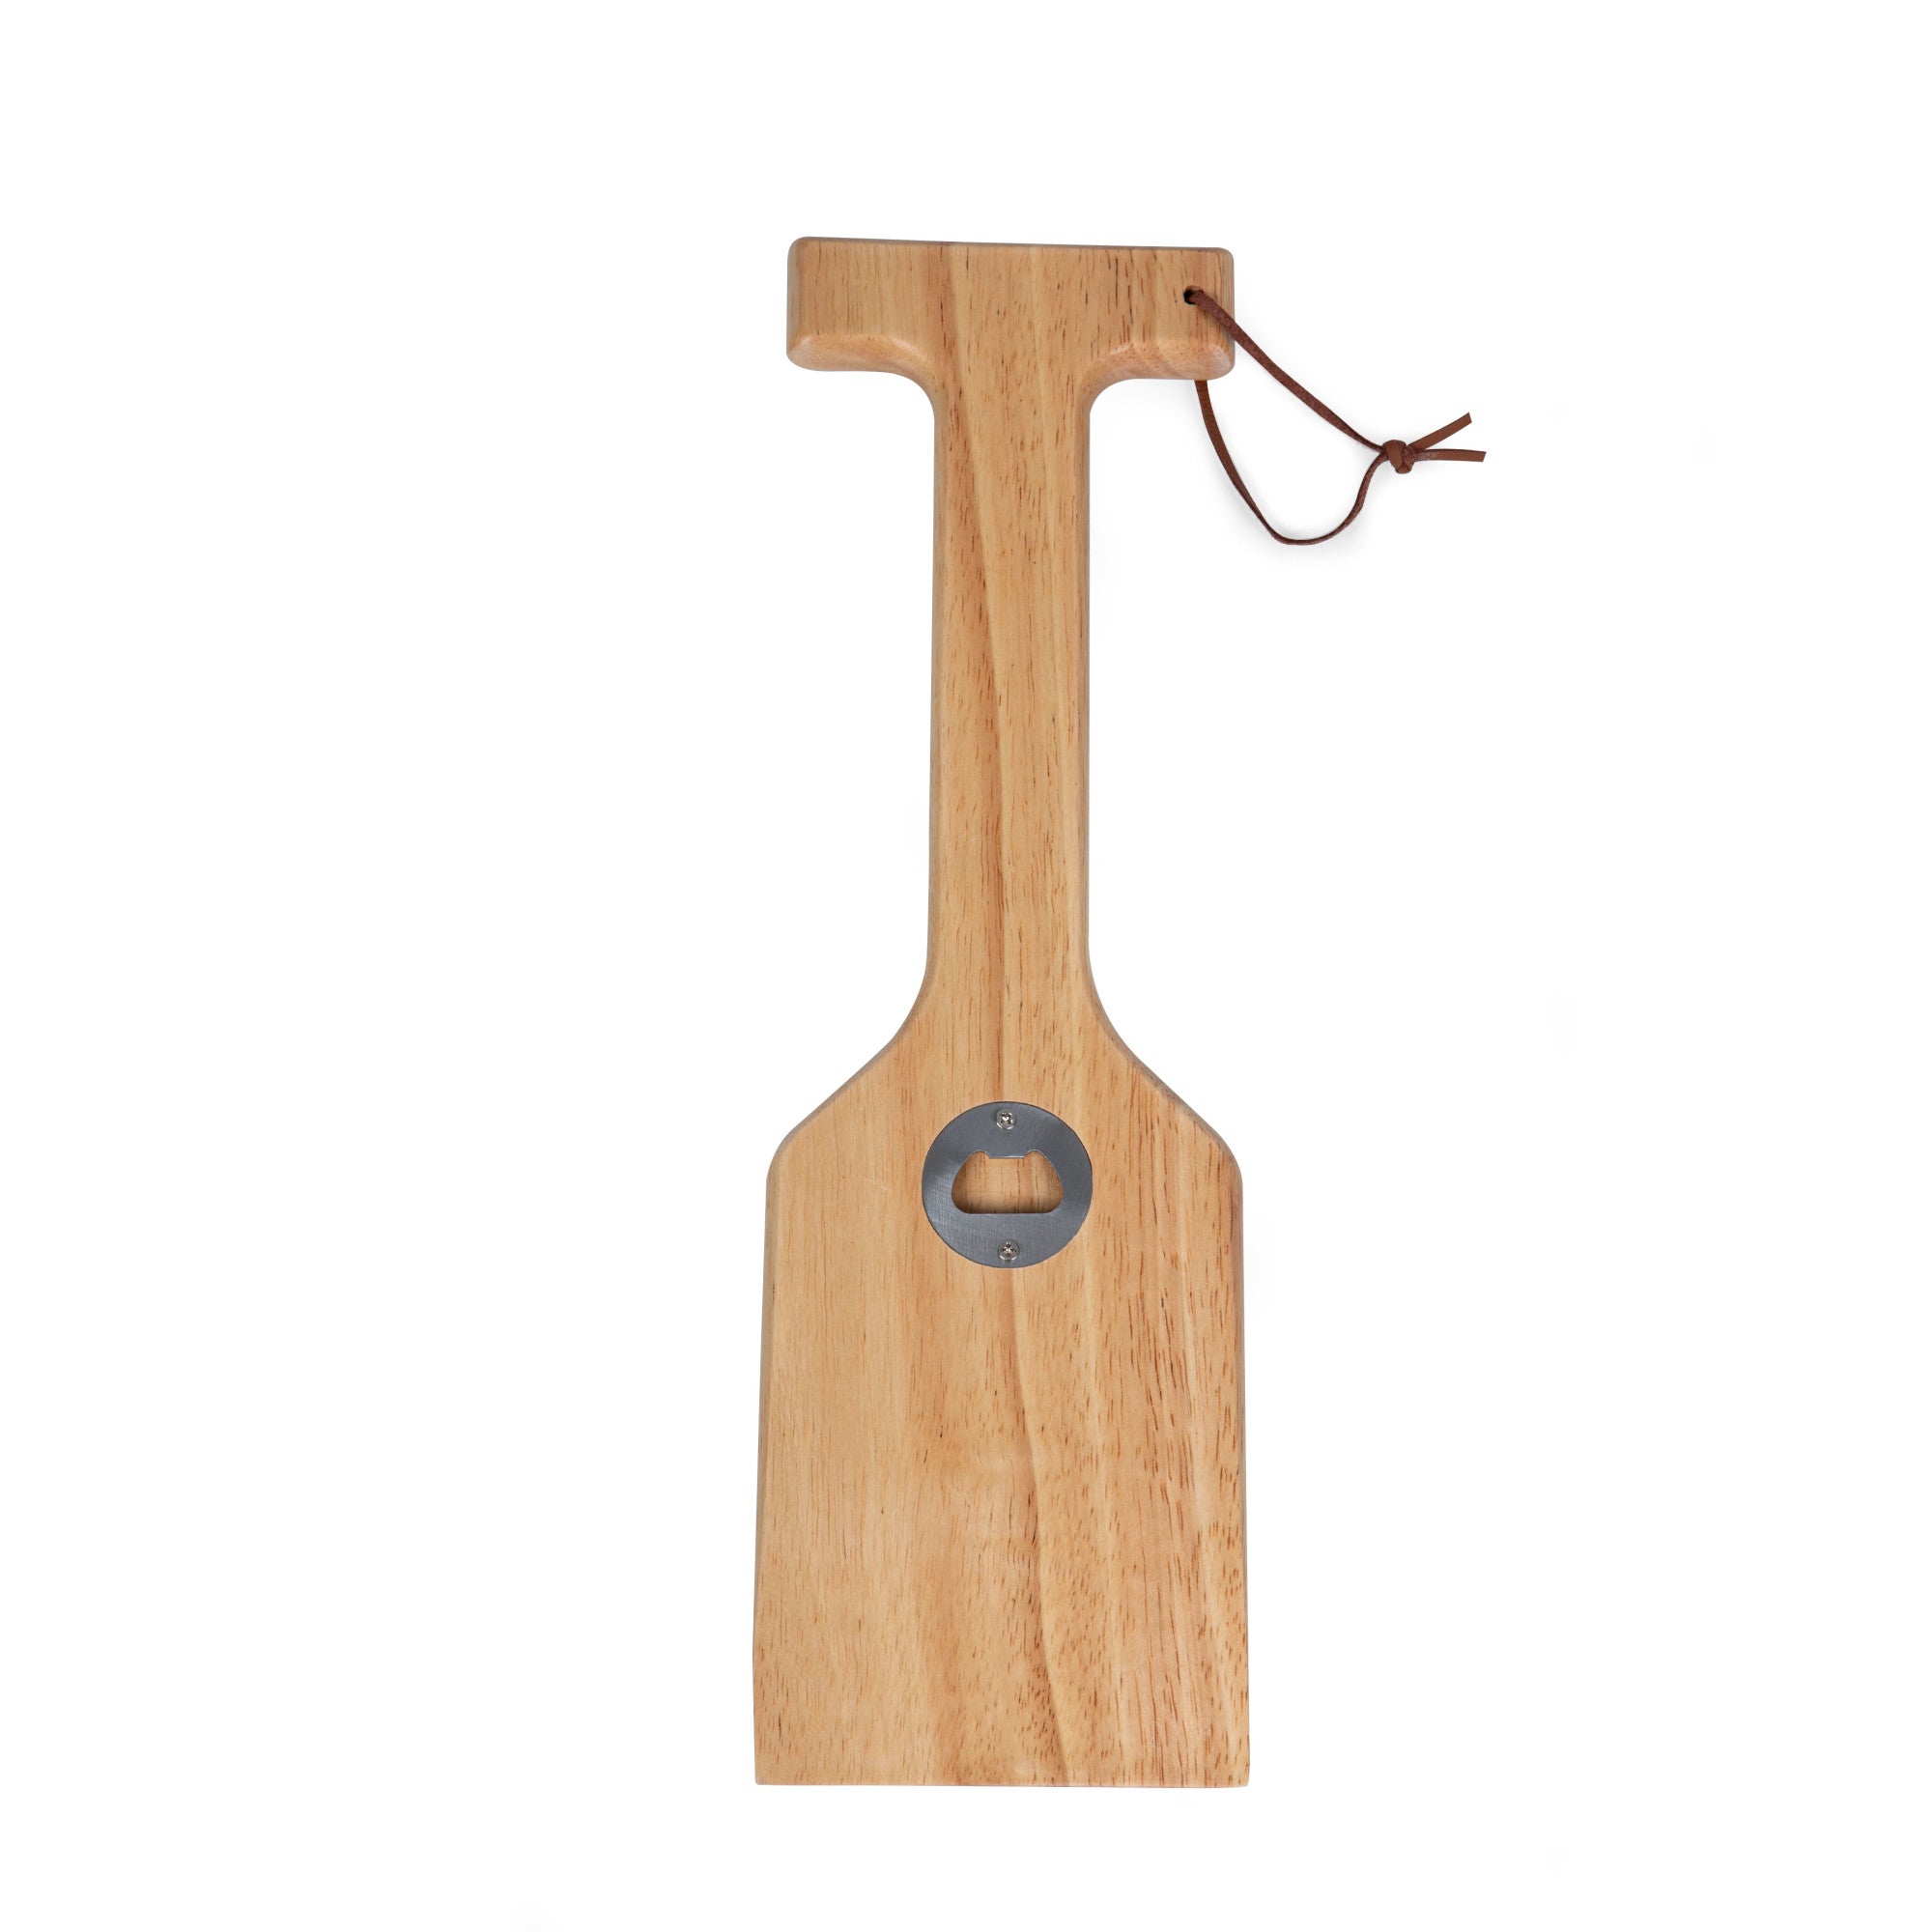 Wyoming Cowboys - Hardwood BBQ Grill Scraper with Bottle Opener